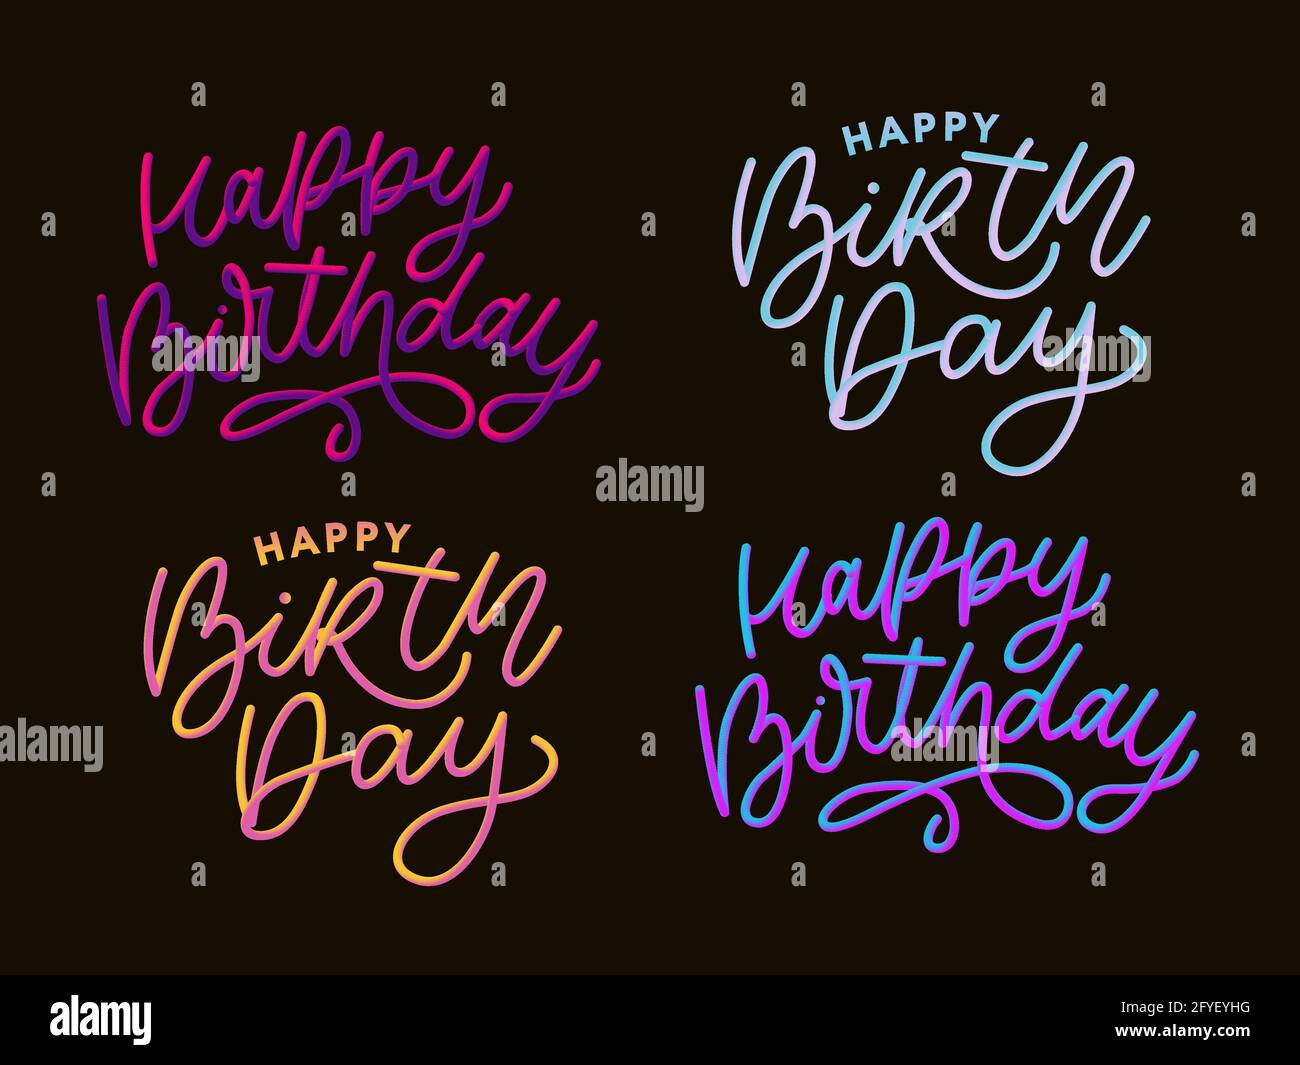 Beautiful Happy Birthday Calligraphy Poster Banque D Image Et Photos Page 3 Alamy